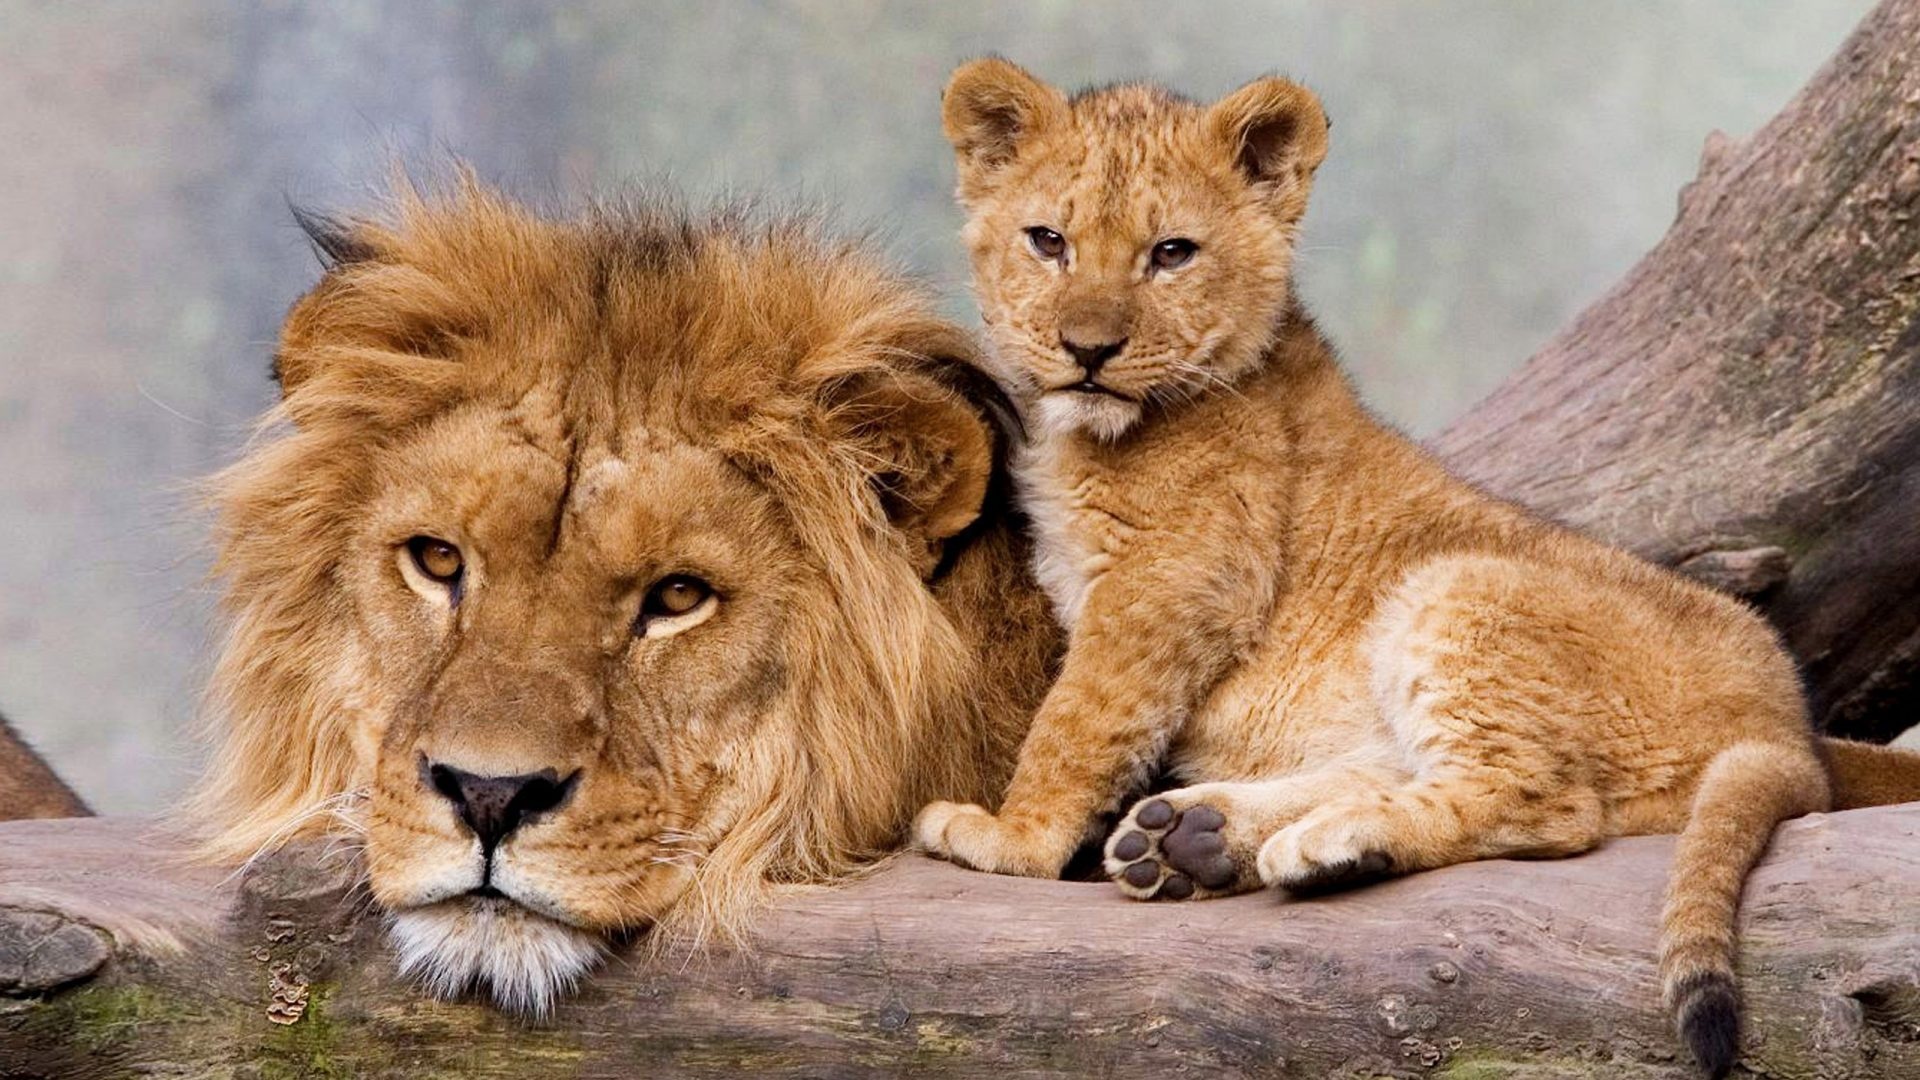 Cub wallpapers collection, Nature's youngest, Animal families, Tender moments, 1920x1080 Full HD Desktop